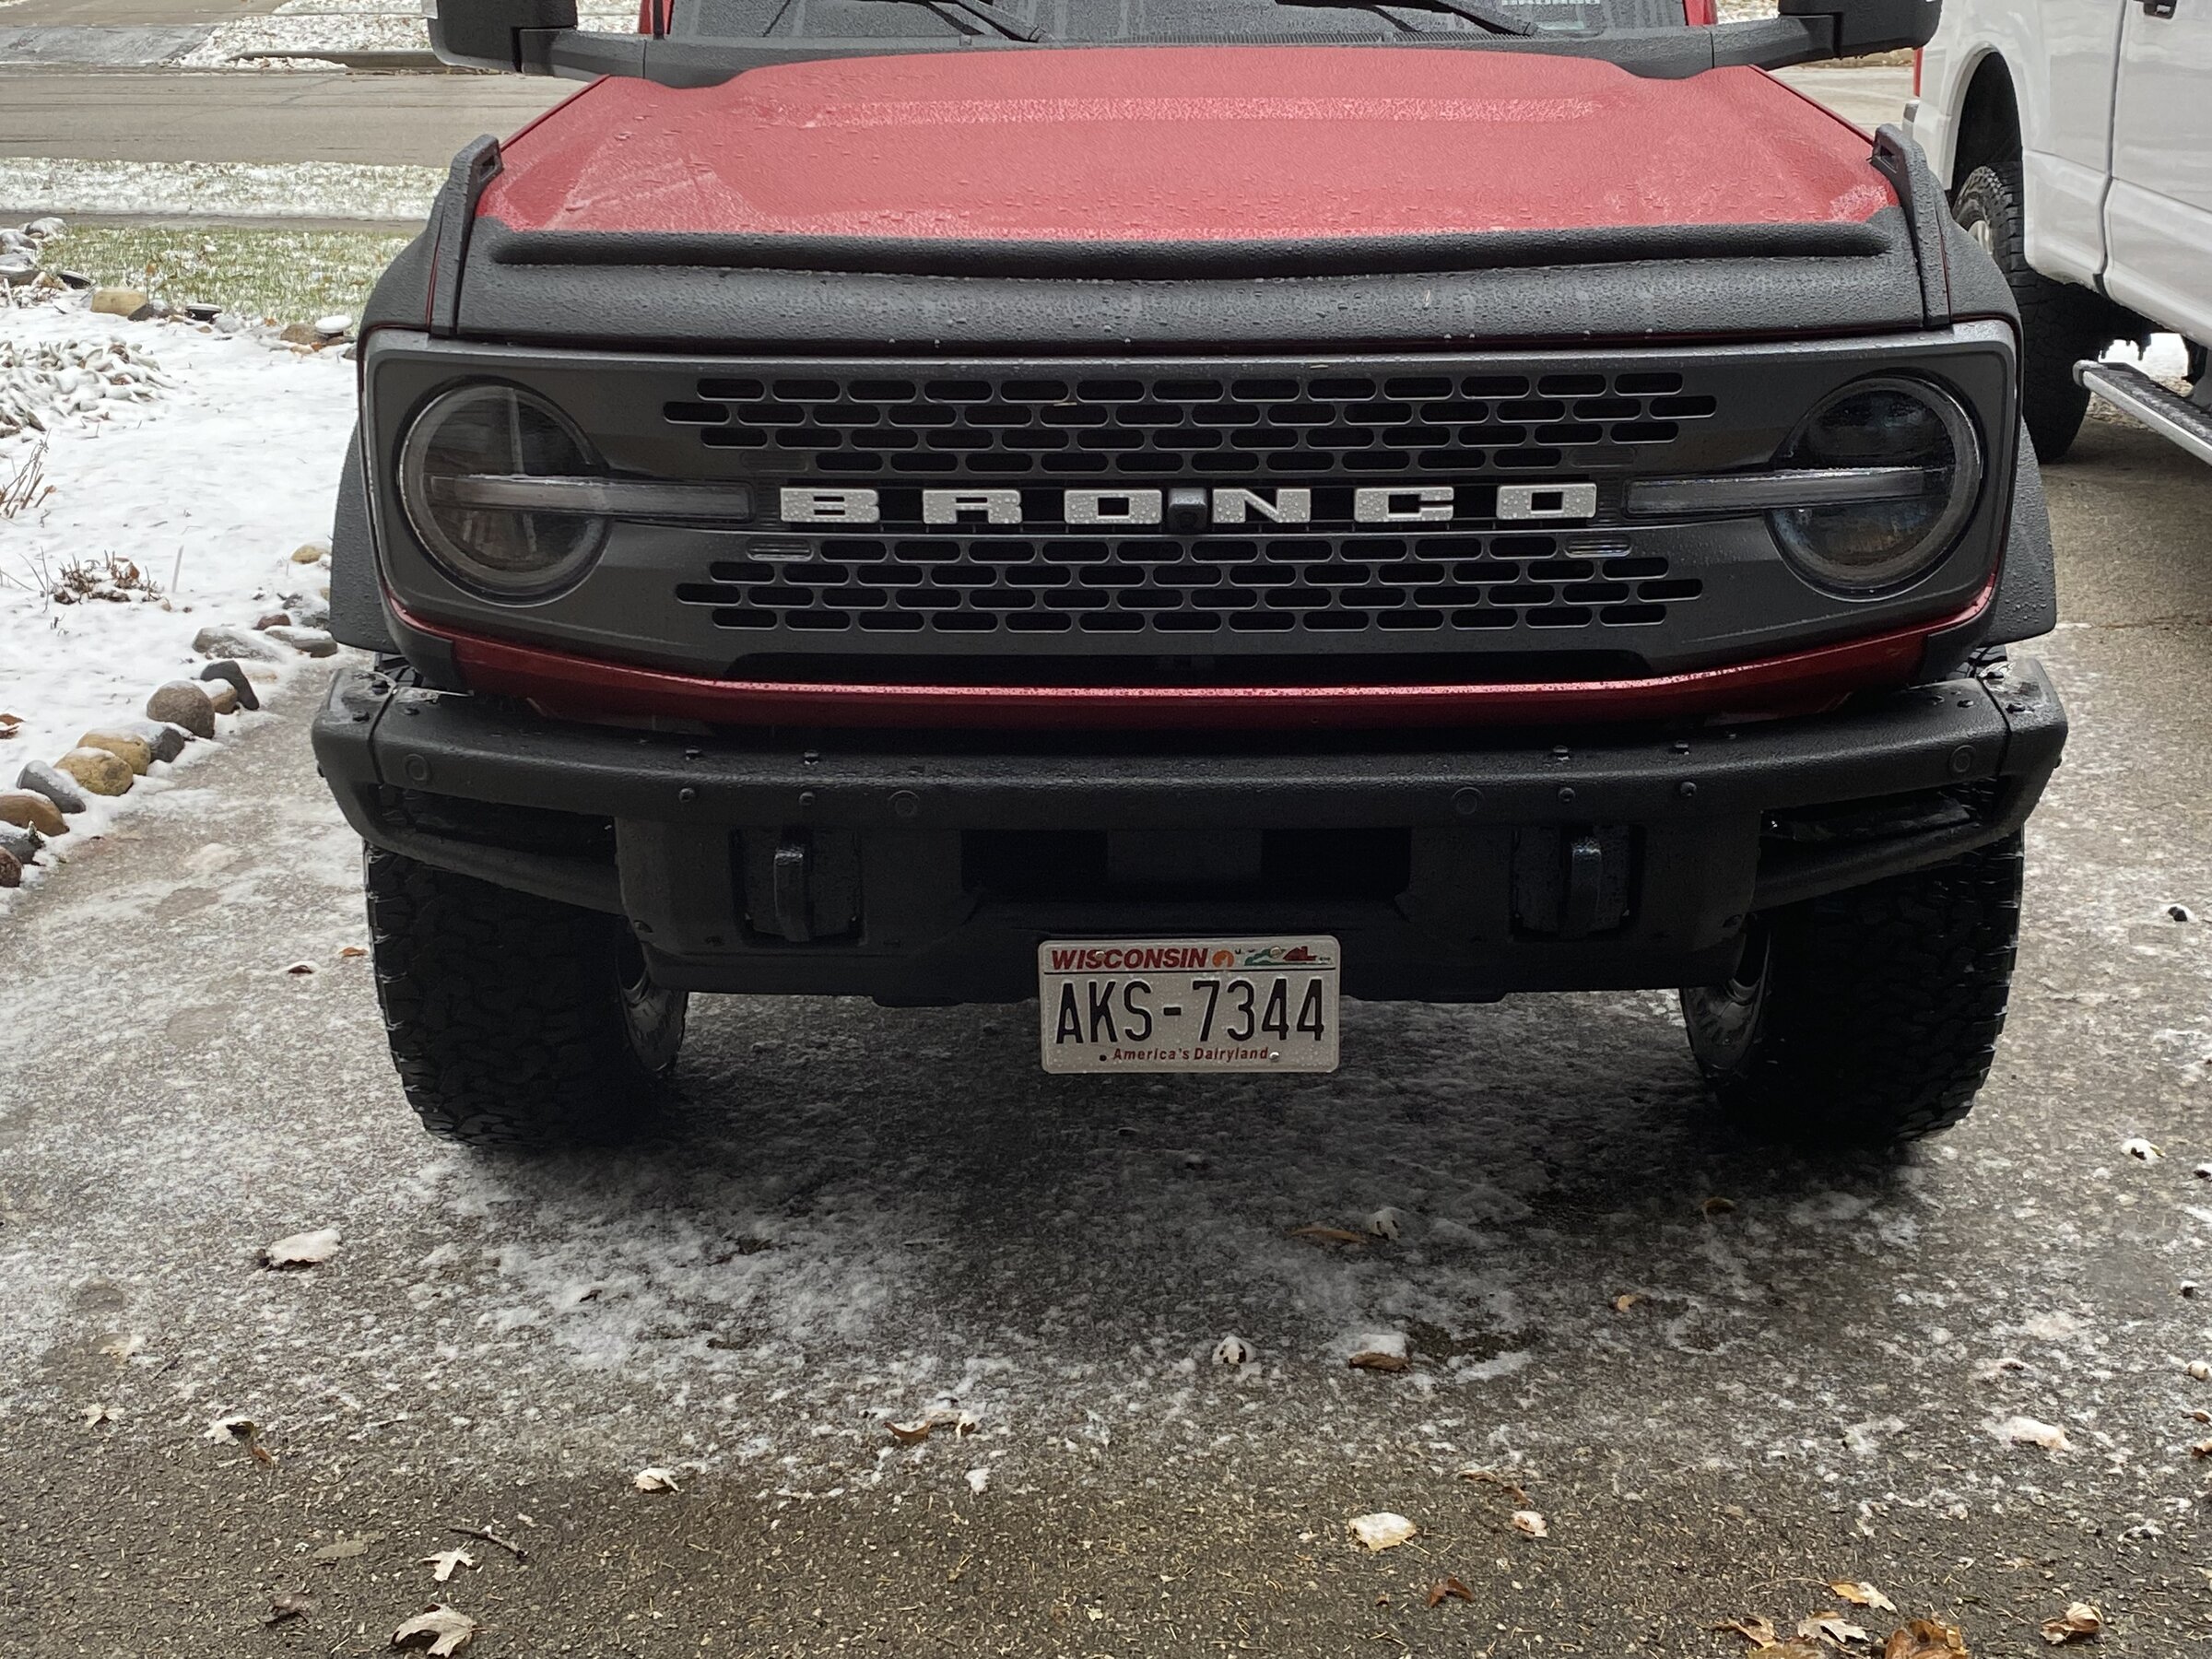 Ford Bronco PRICE DROP - Finally a Front License Plate bracket solution - order yours today IMG_0446[1].JPG